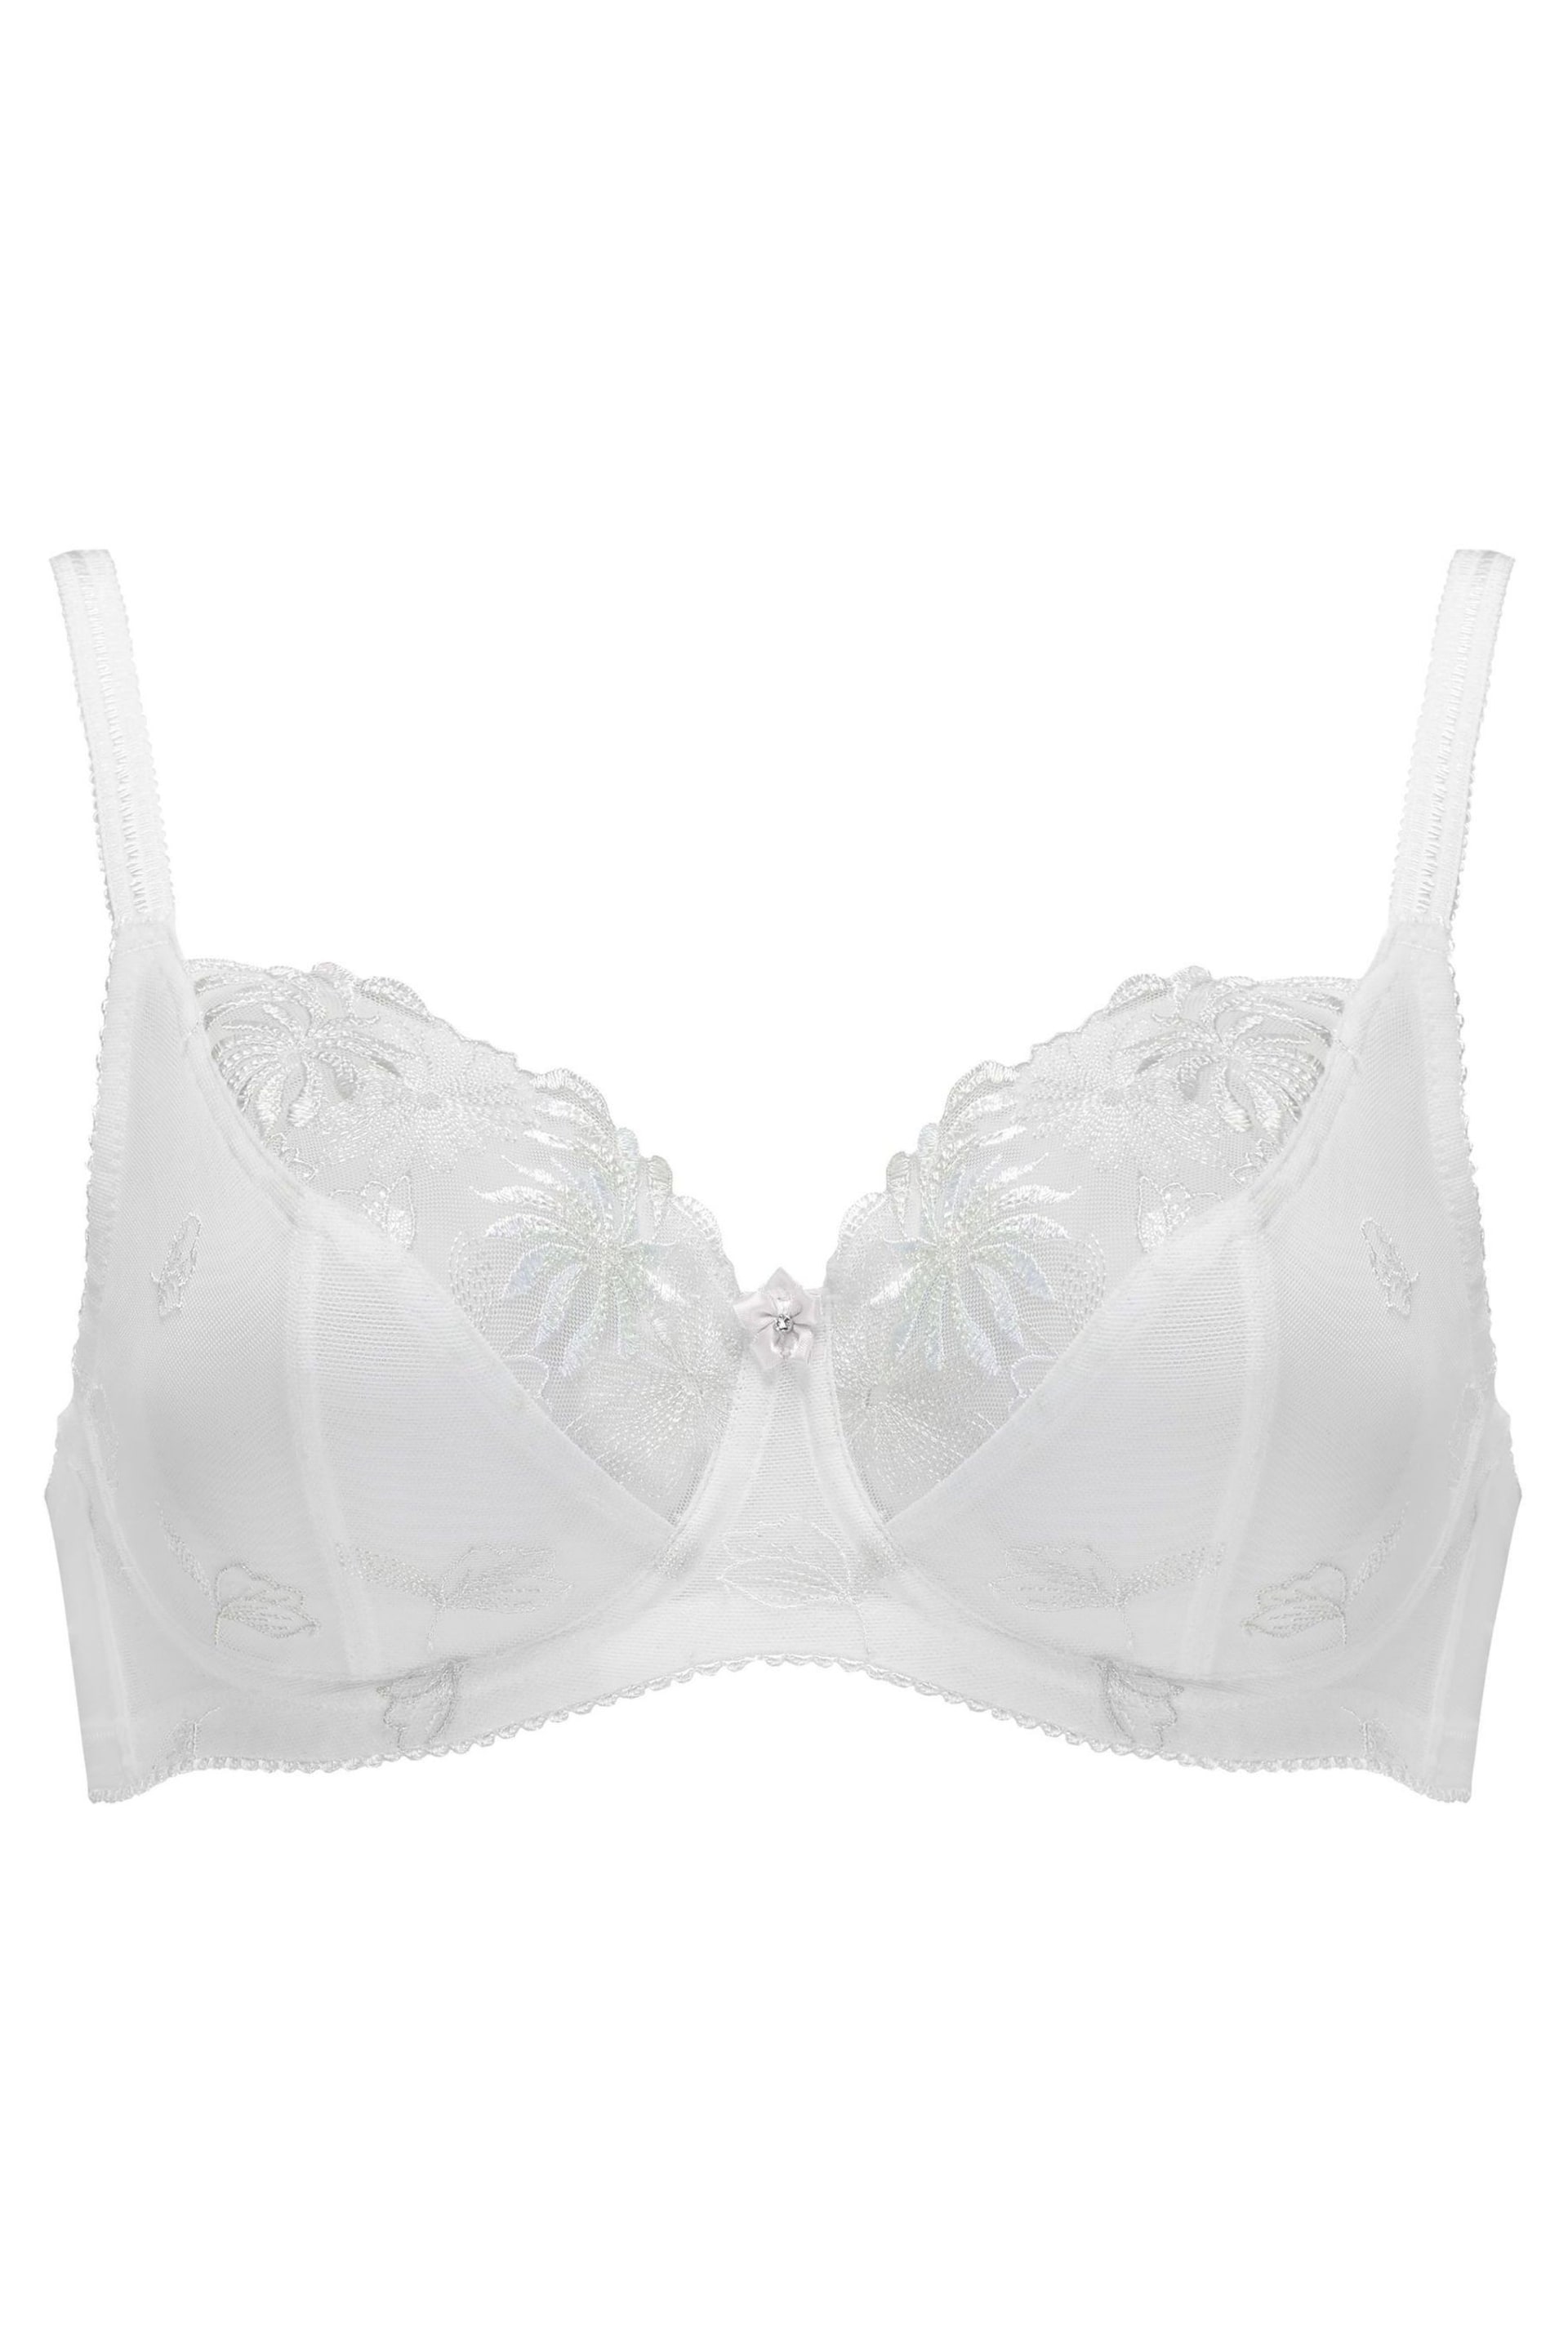 Pour Moi White Non Padded Underwired St Tropez Full Cup Bra - Image 3 of 4